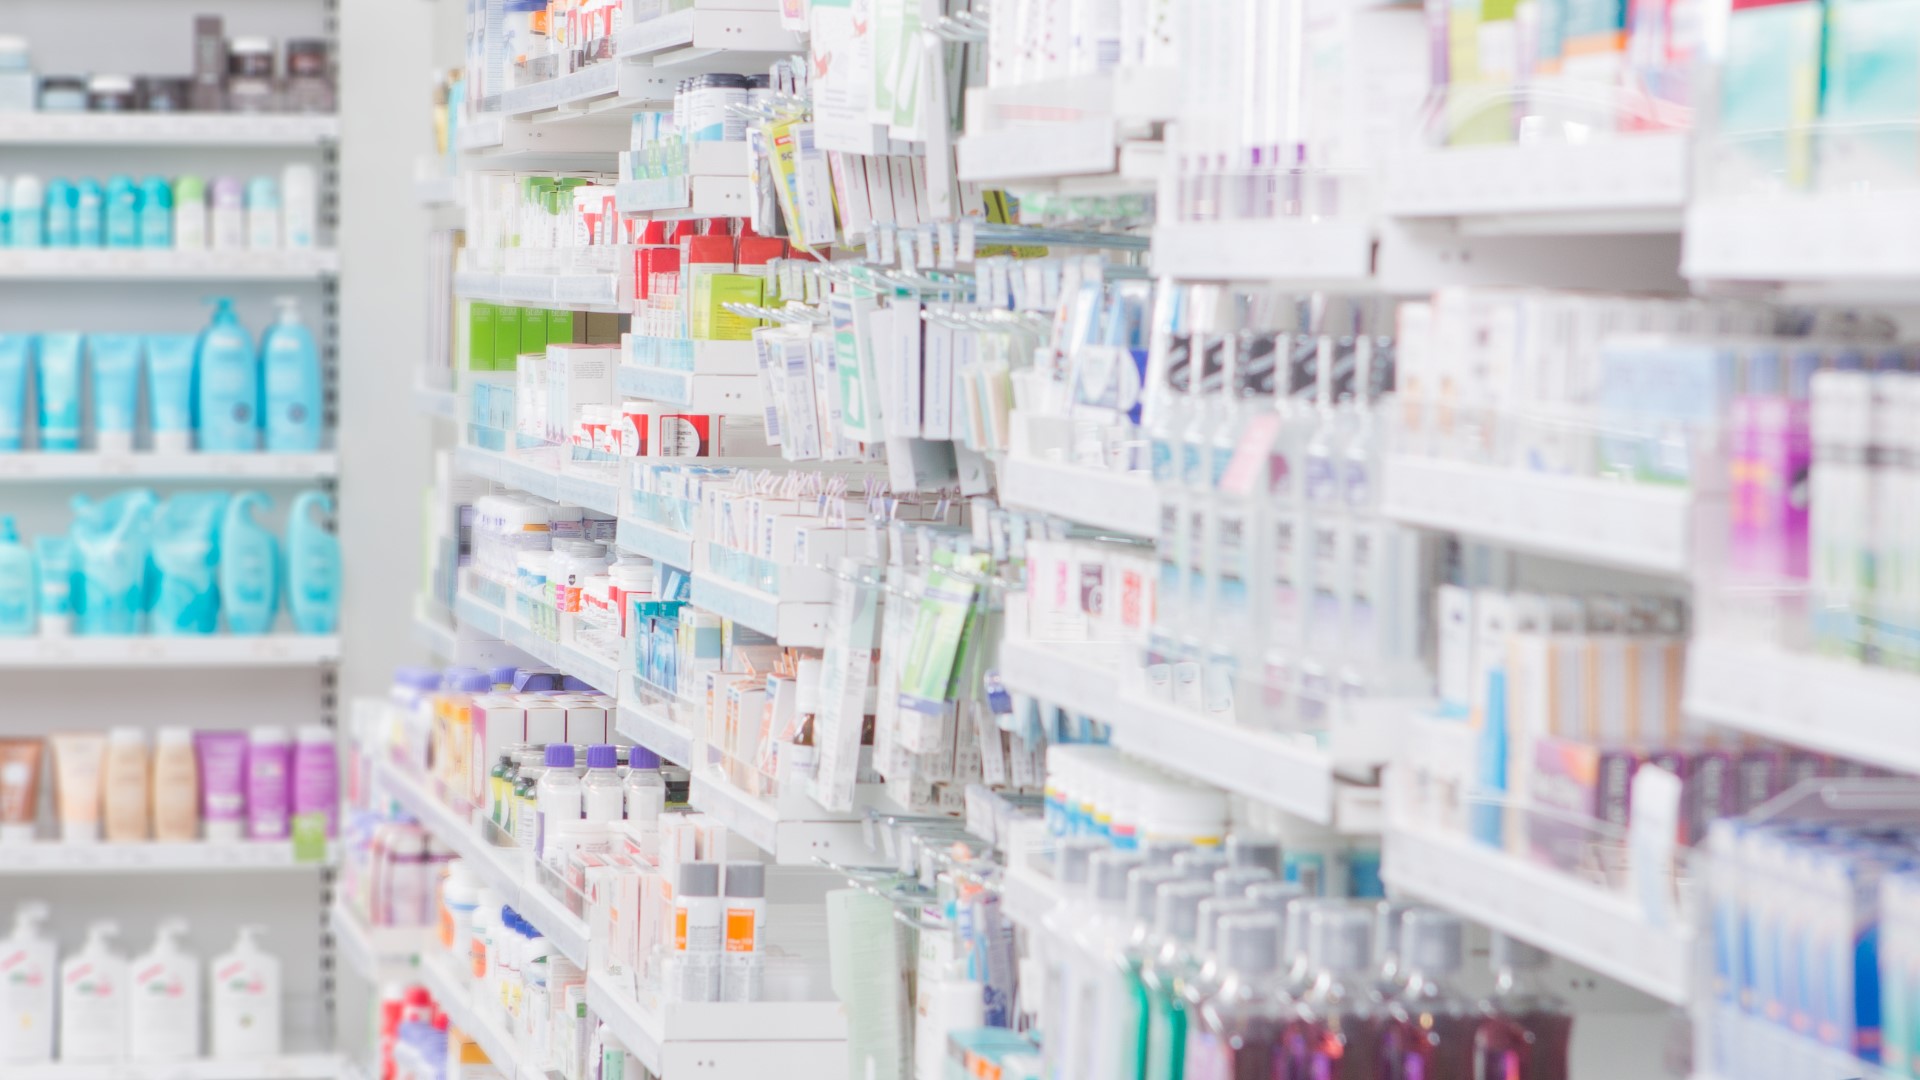 You might have noticed some changes at your pharmacy different hours or longer wait times.